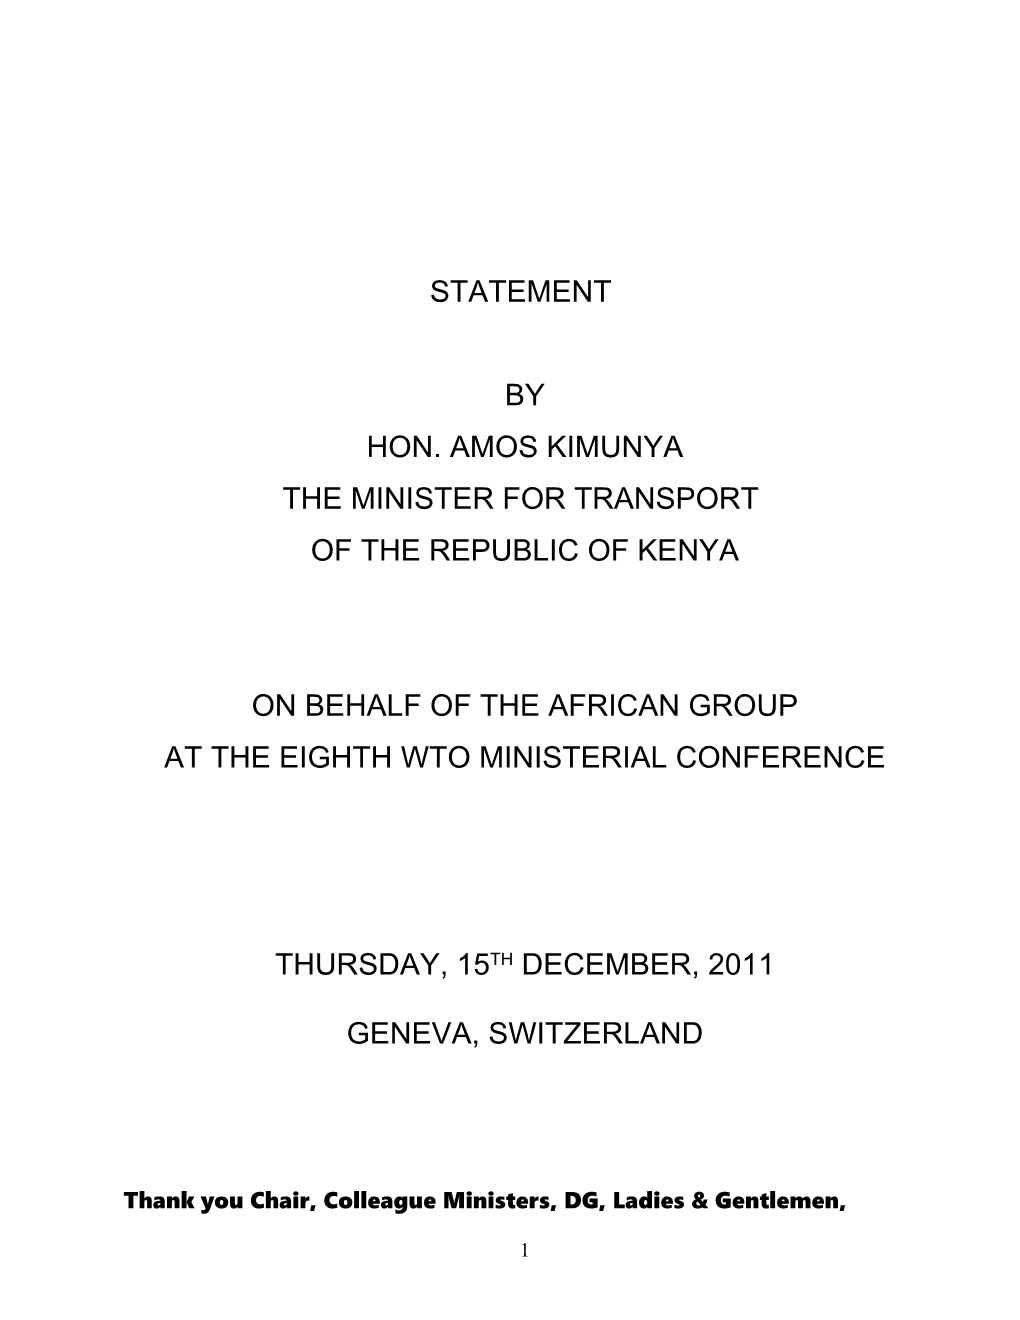 The Minister for Transport